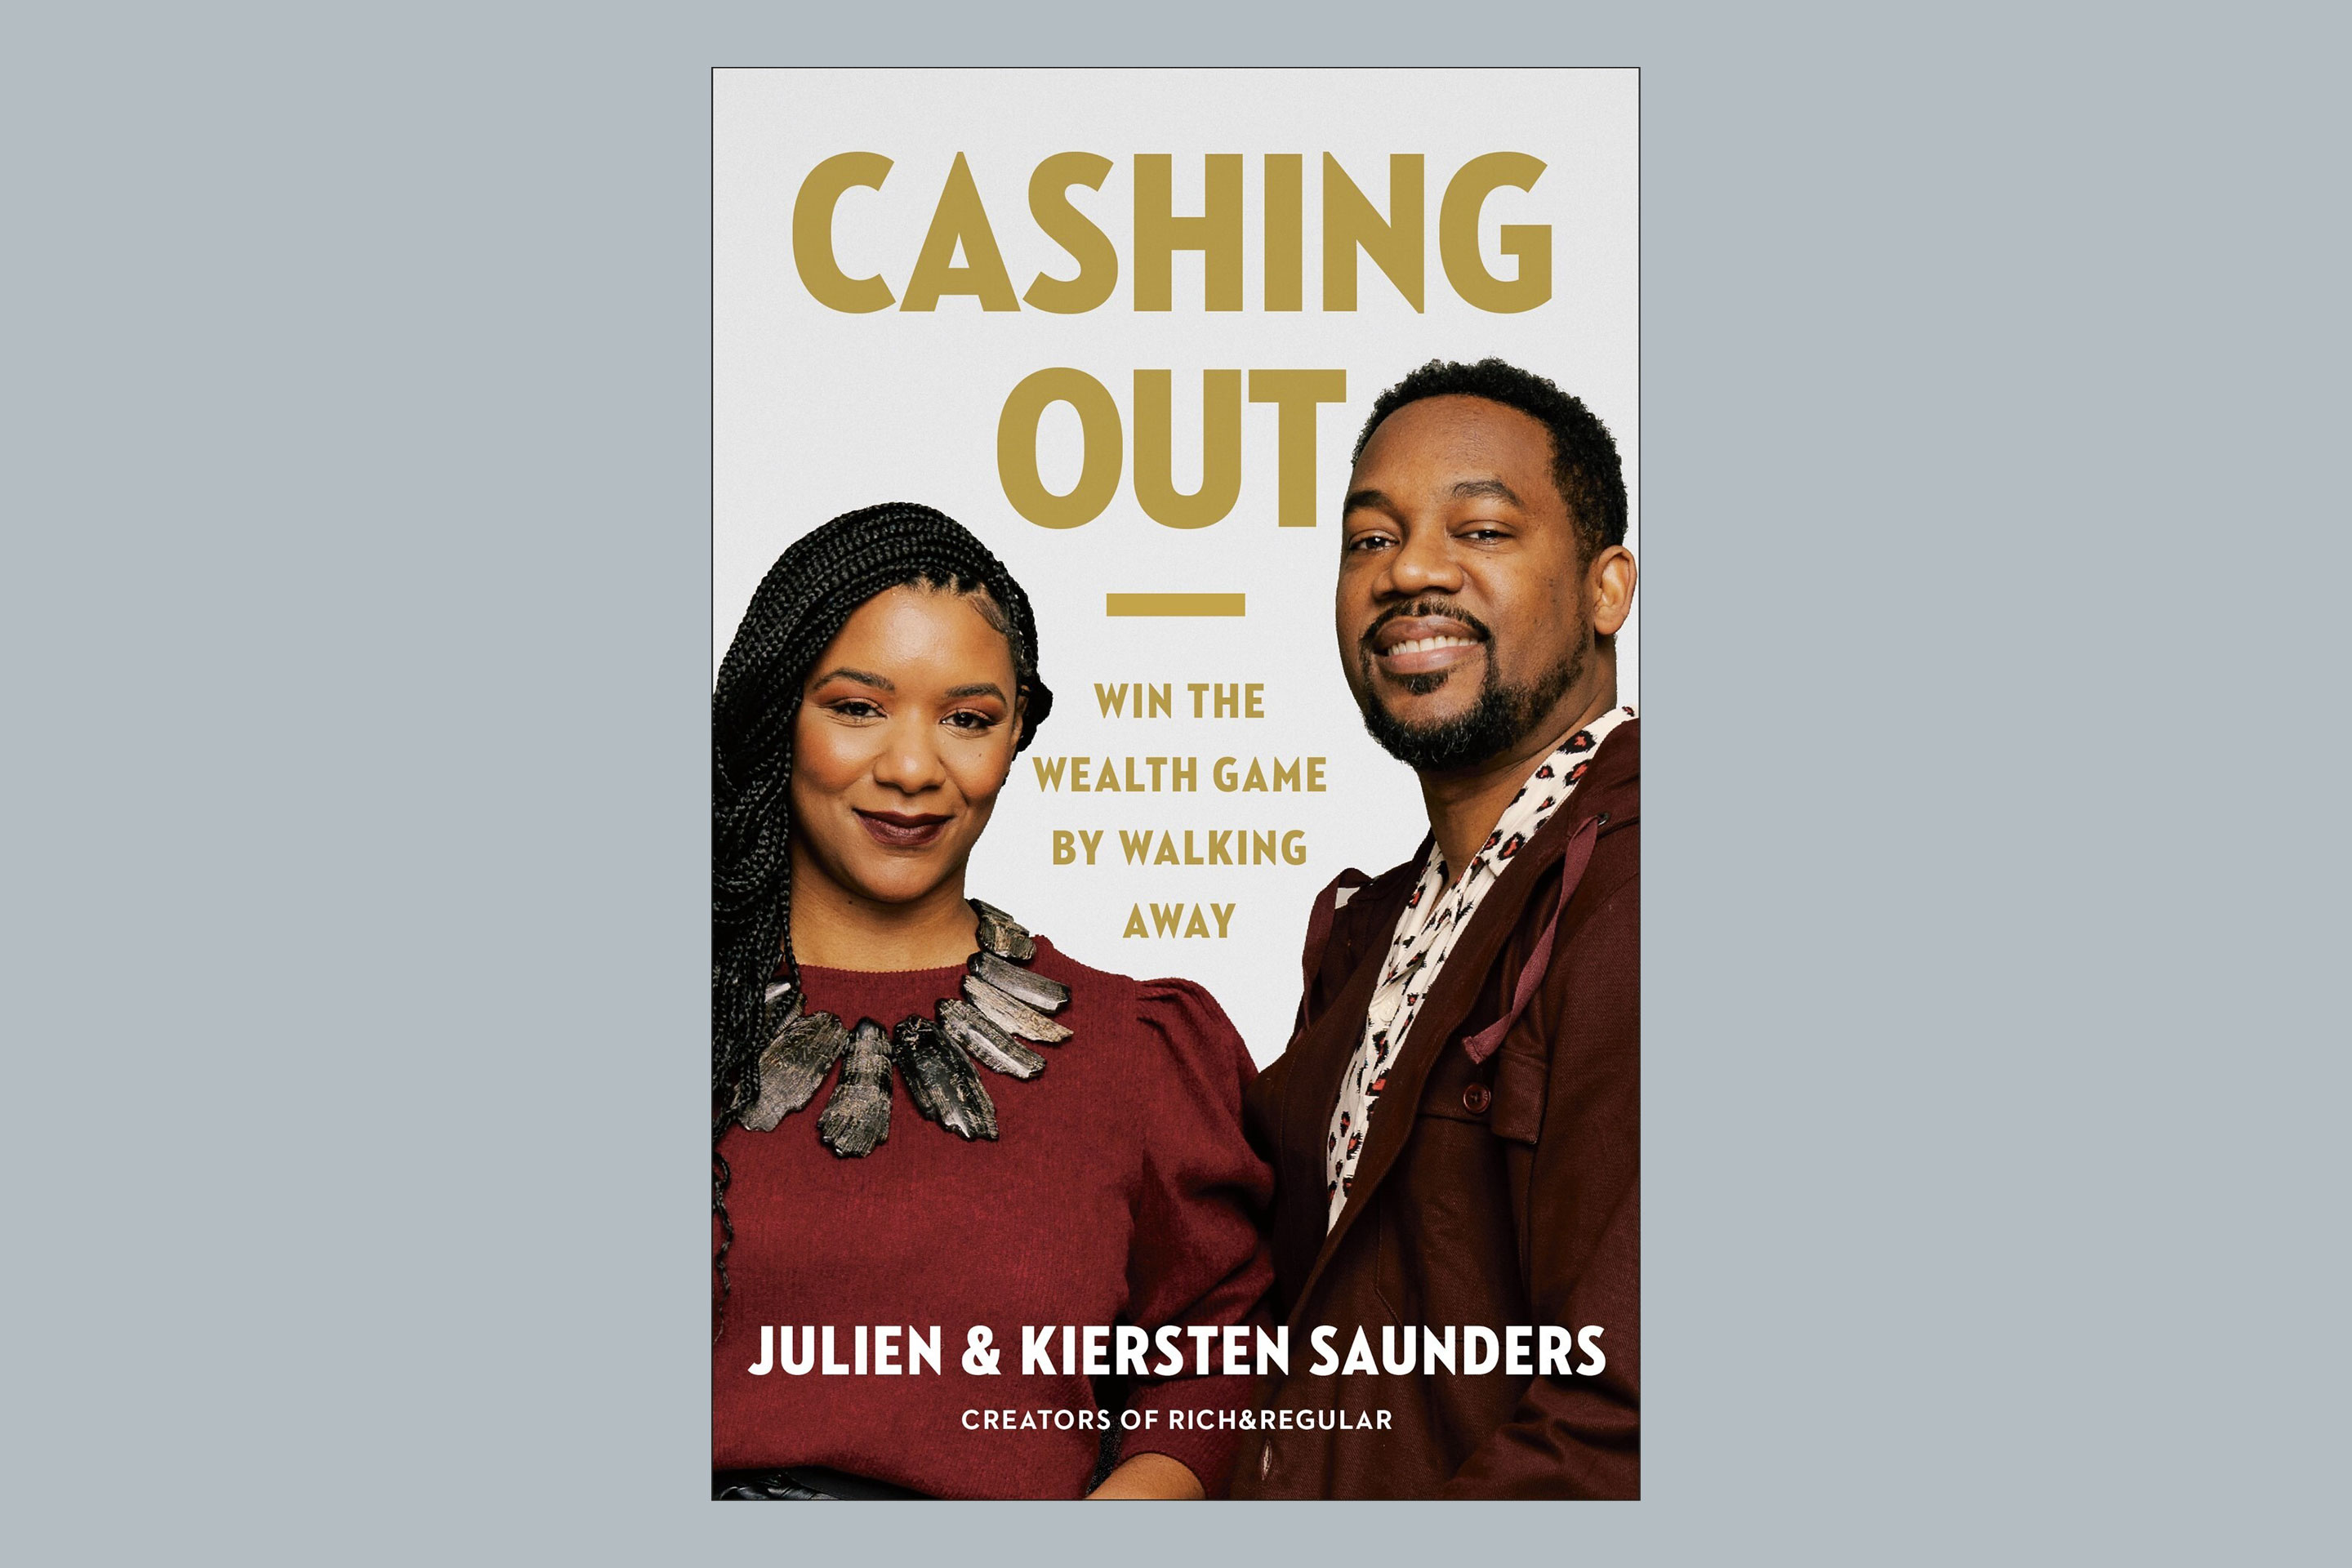 Cashing Out Book Cover by Julien &amp; Kiersten Saunders